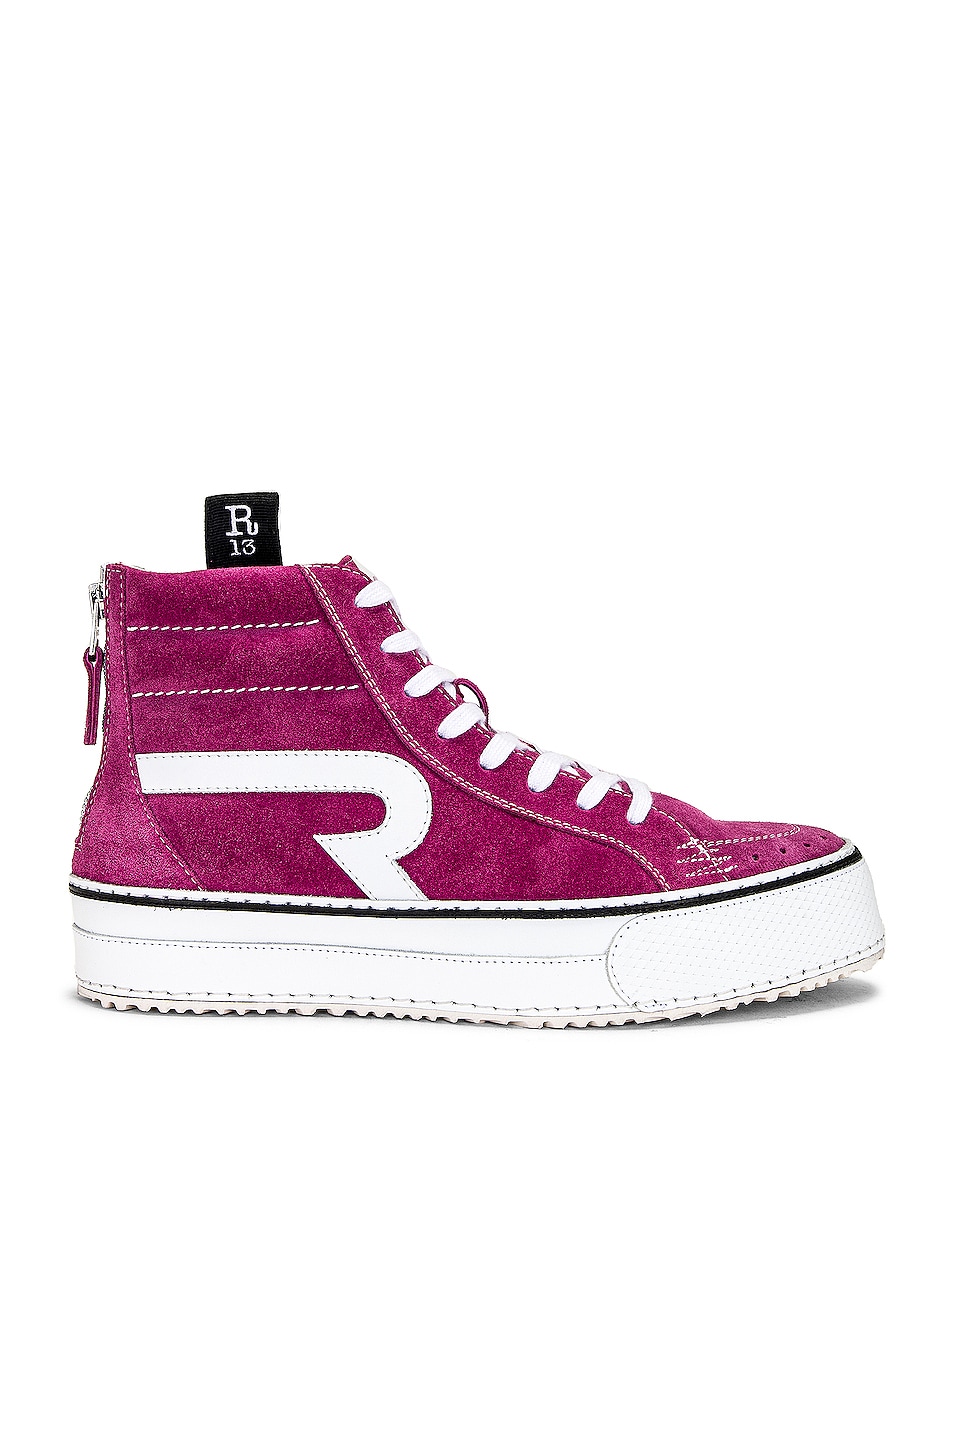 Image 1 of R13 The Rogue Sneaker (Single Stack) in BRIGHT PINK SUEDE